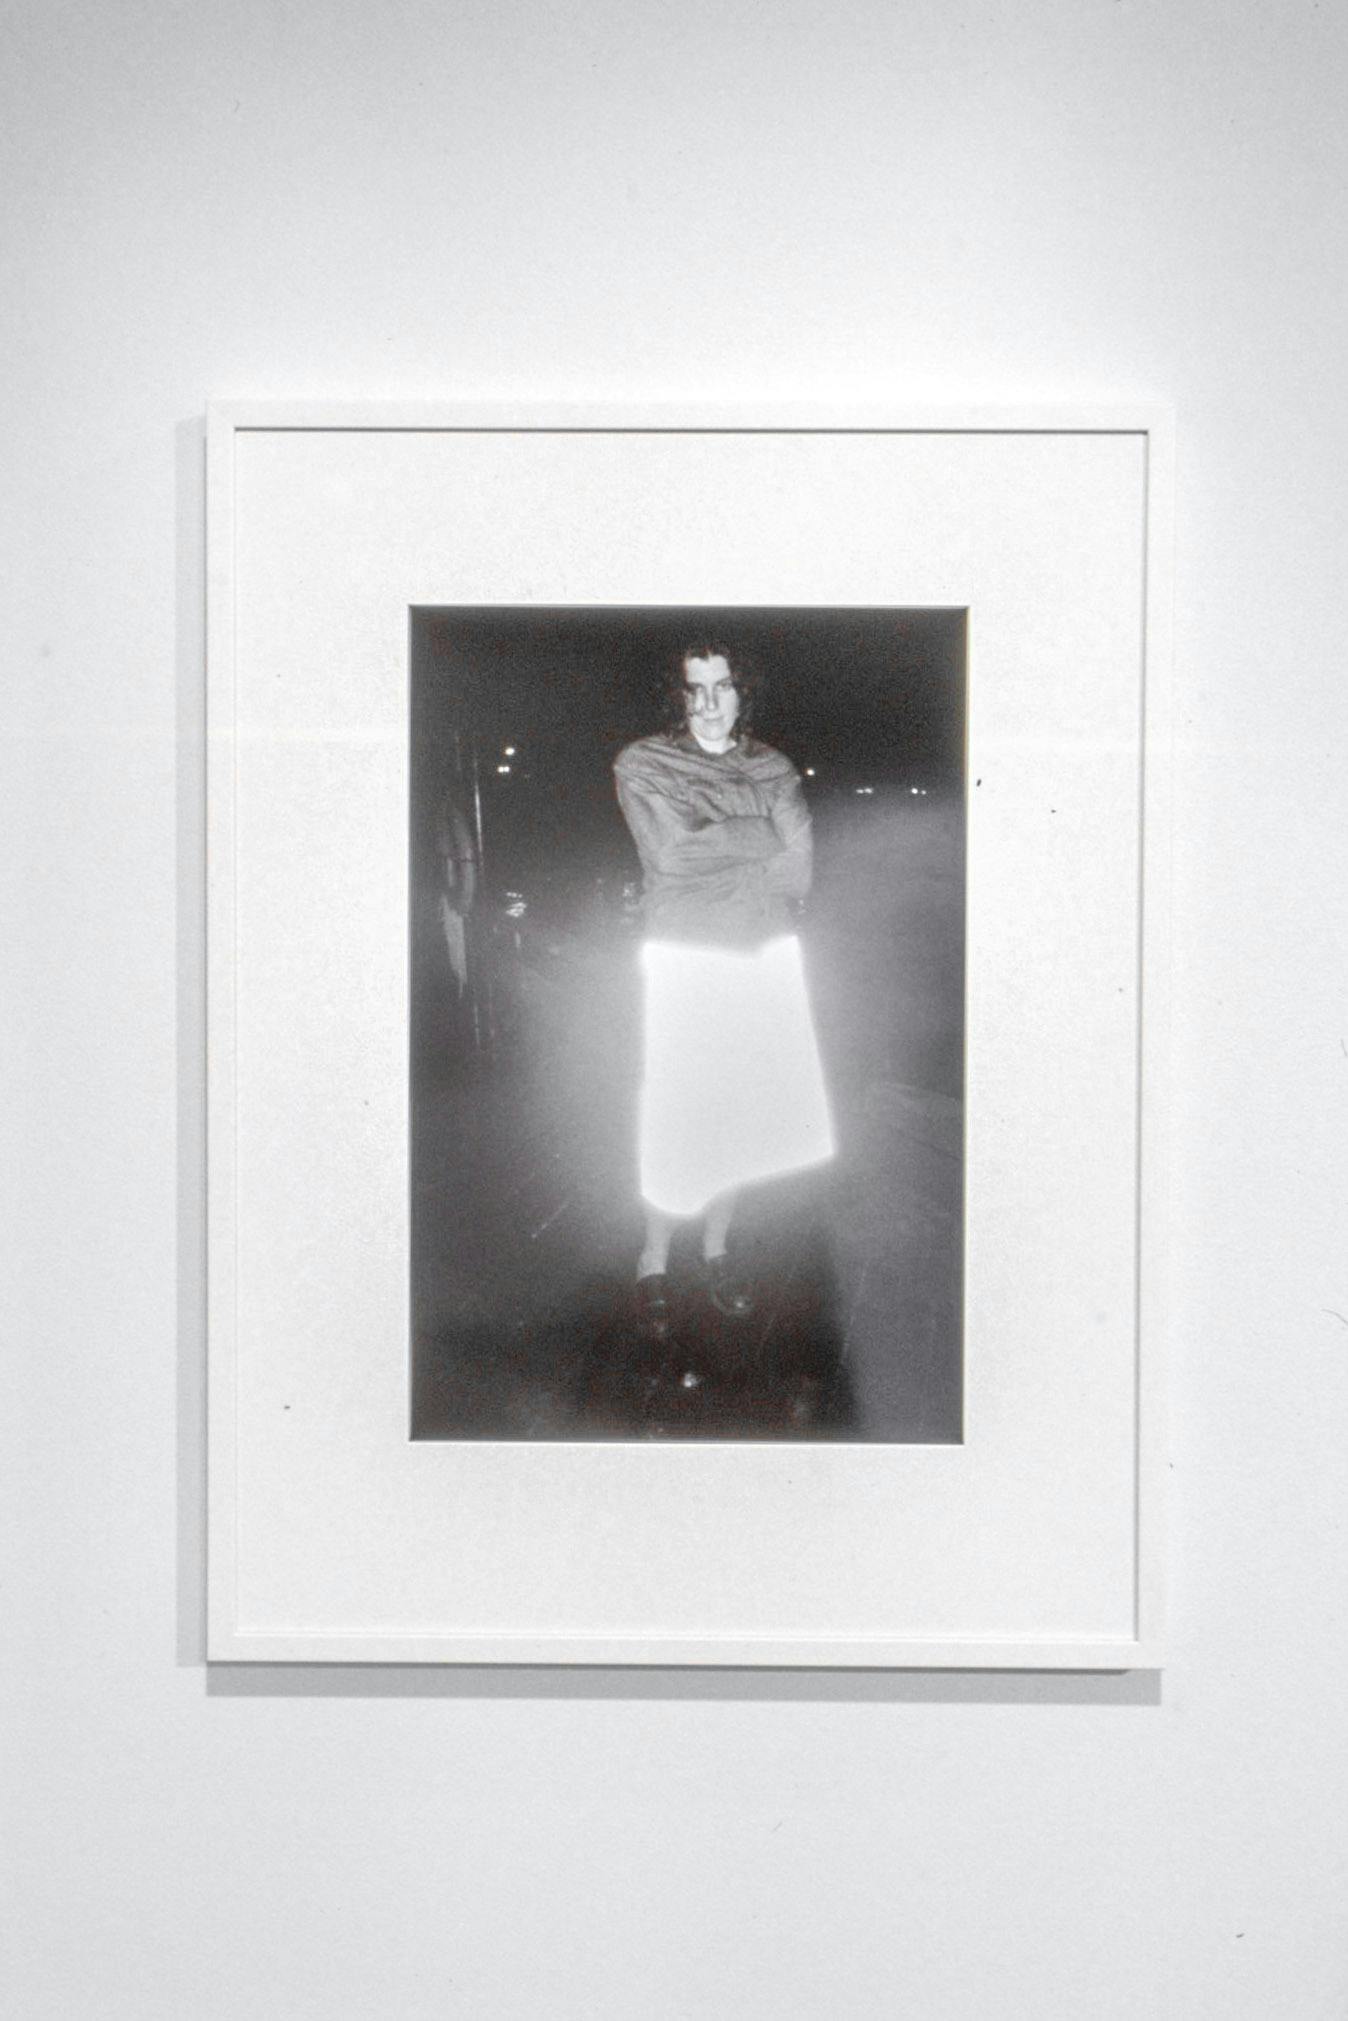 A framed black and white photograph is mounted on a wall. It depicts the entire body of a woman standing on a street at night. This person wears a skirt that reflects the flashing light of the camera.